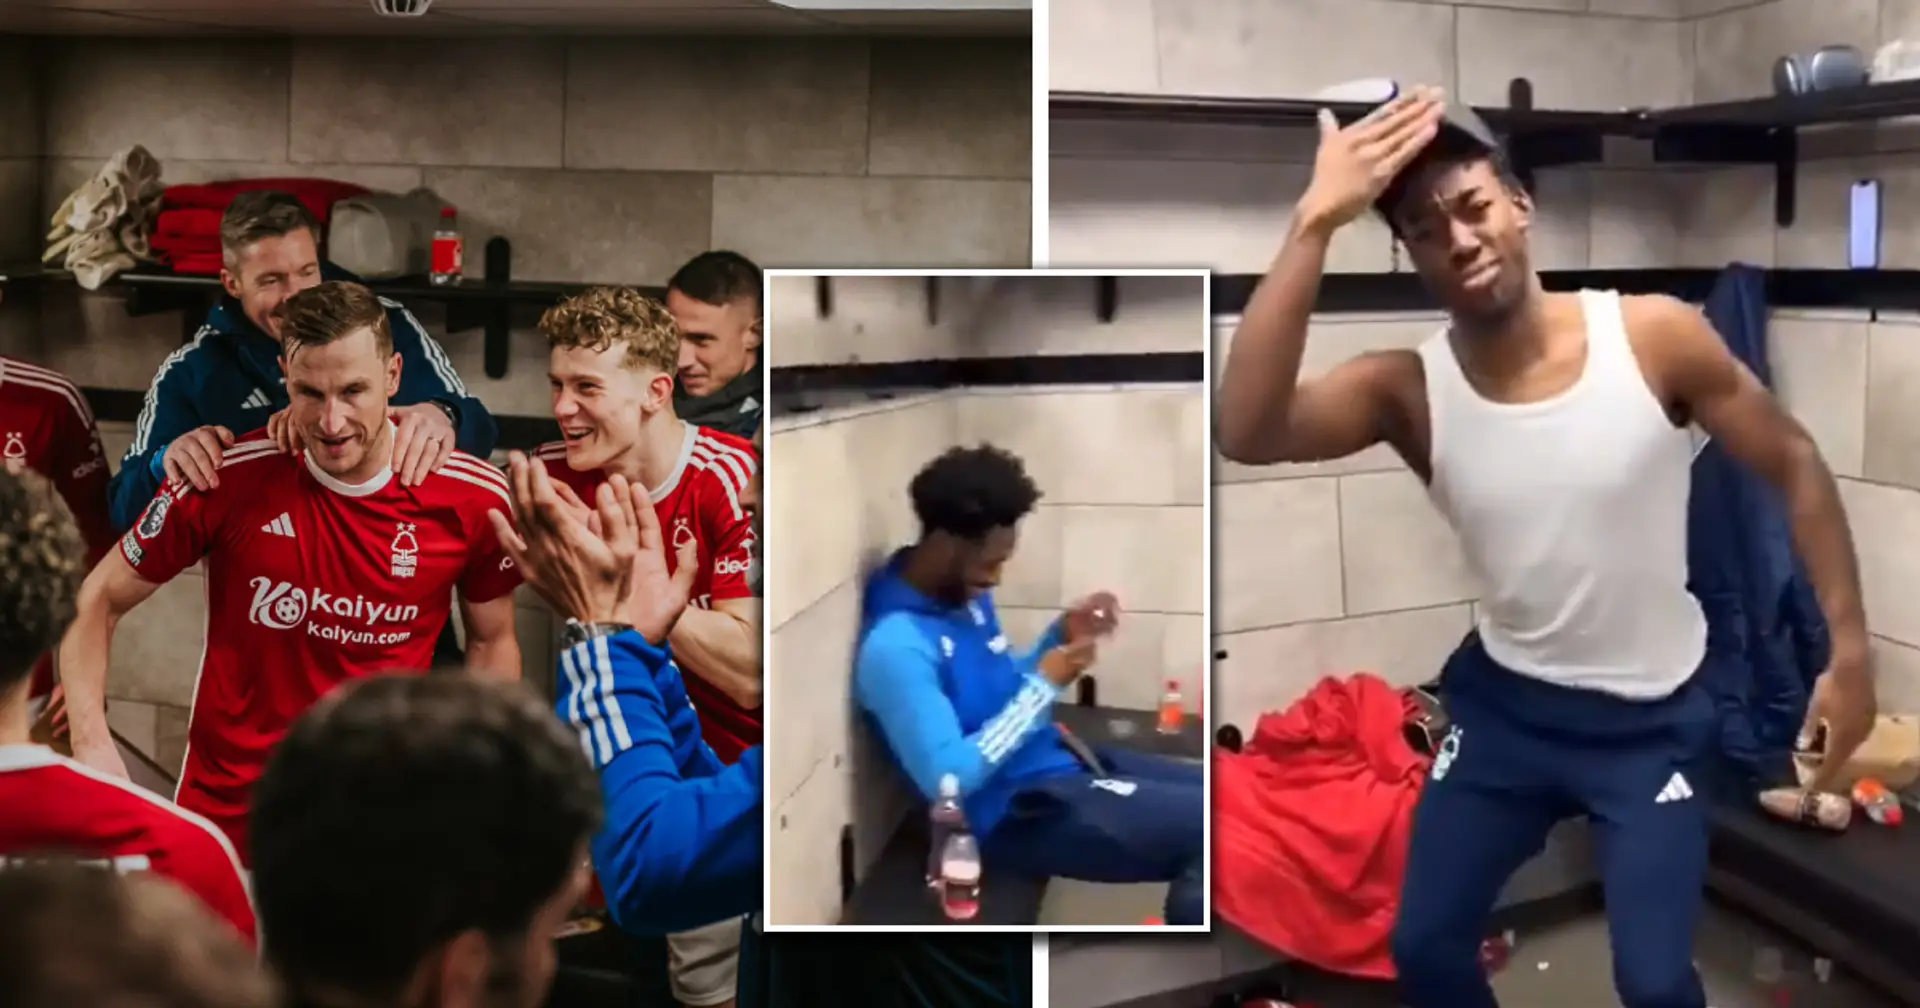 'Prison cell': Fans surprised by the state of Newcastle's dressing room in Anthony Elanga's viral video